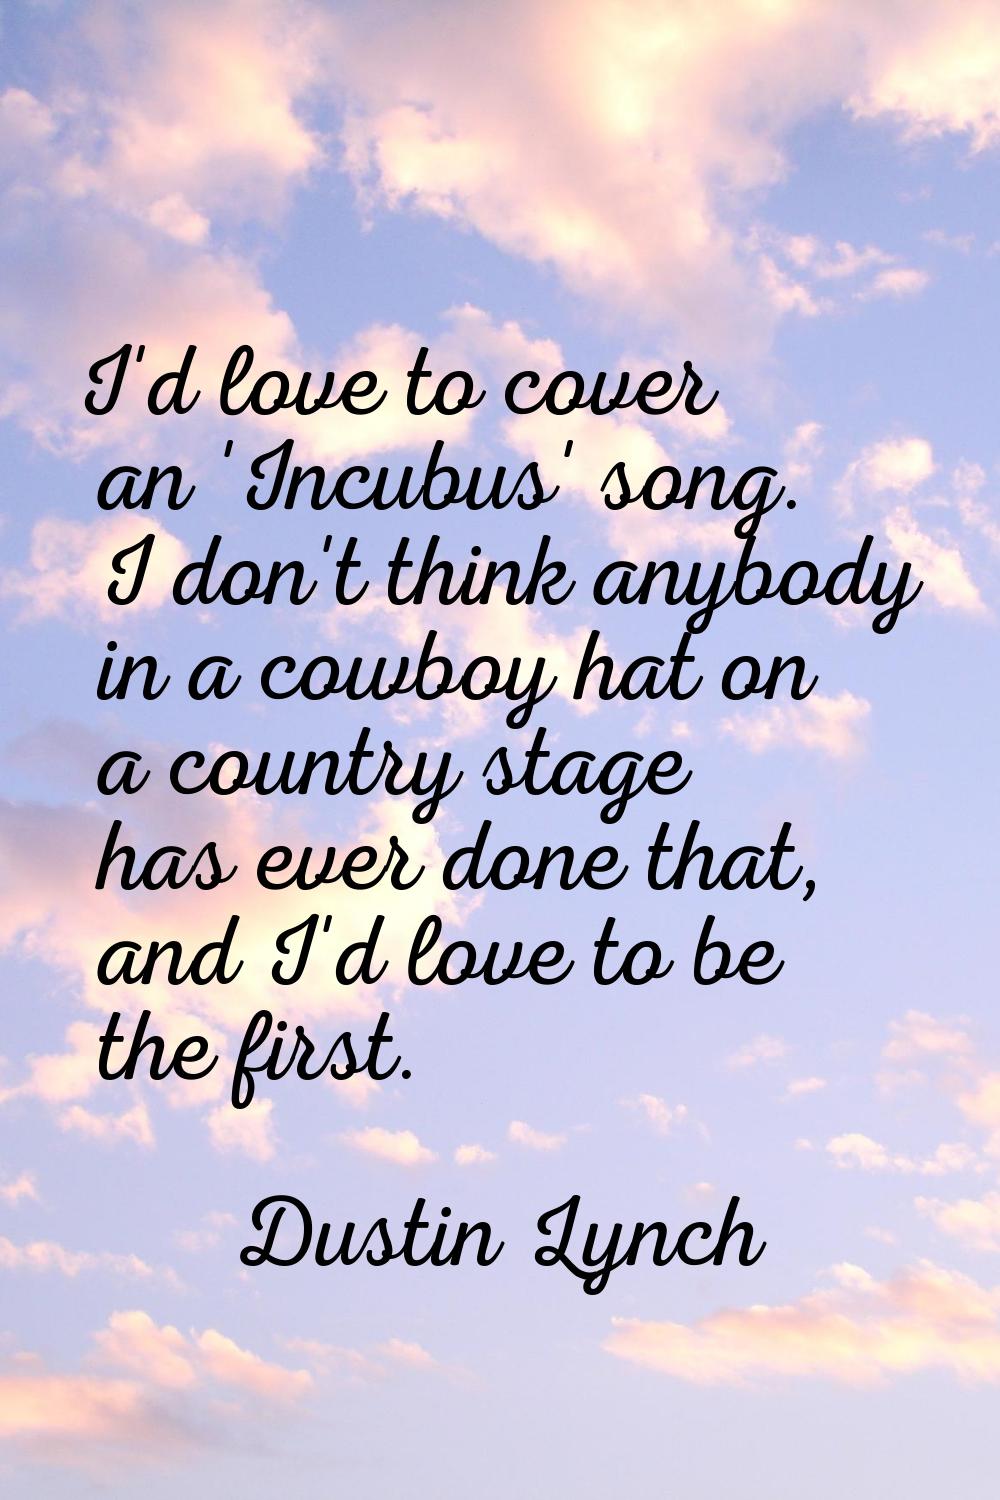 I'd love to cover an 'Incubus' song. I don't think anybody in a cowboy hat on a country stage has e